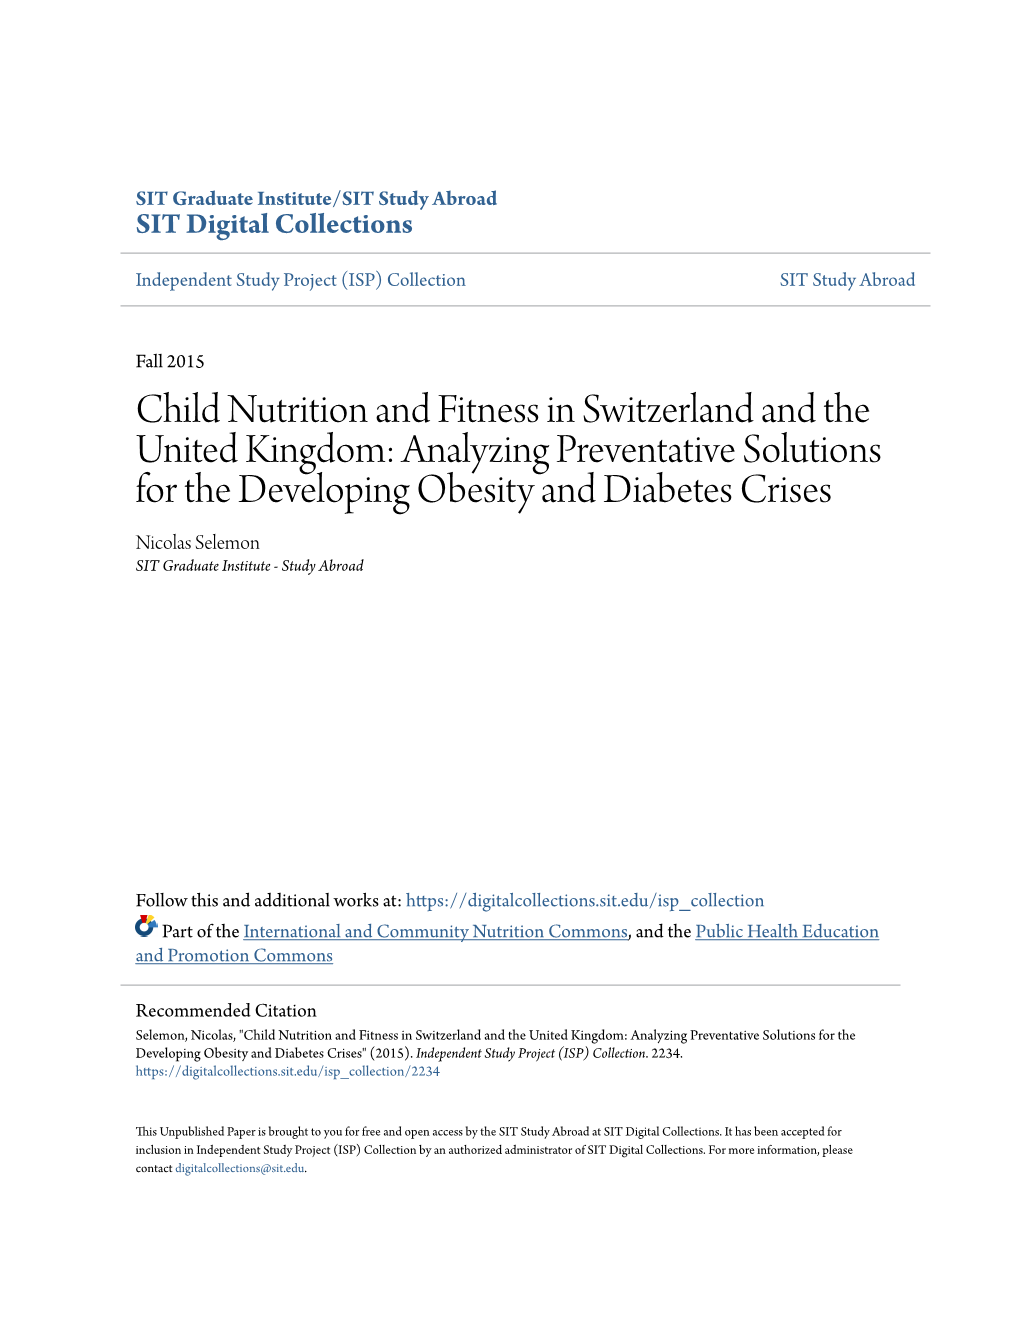 Child Nutrition and Fitness in Switzerland and the United Kingdom